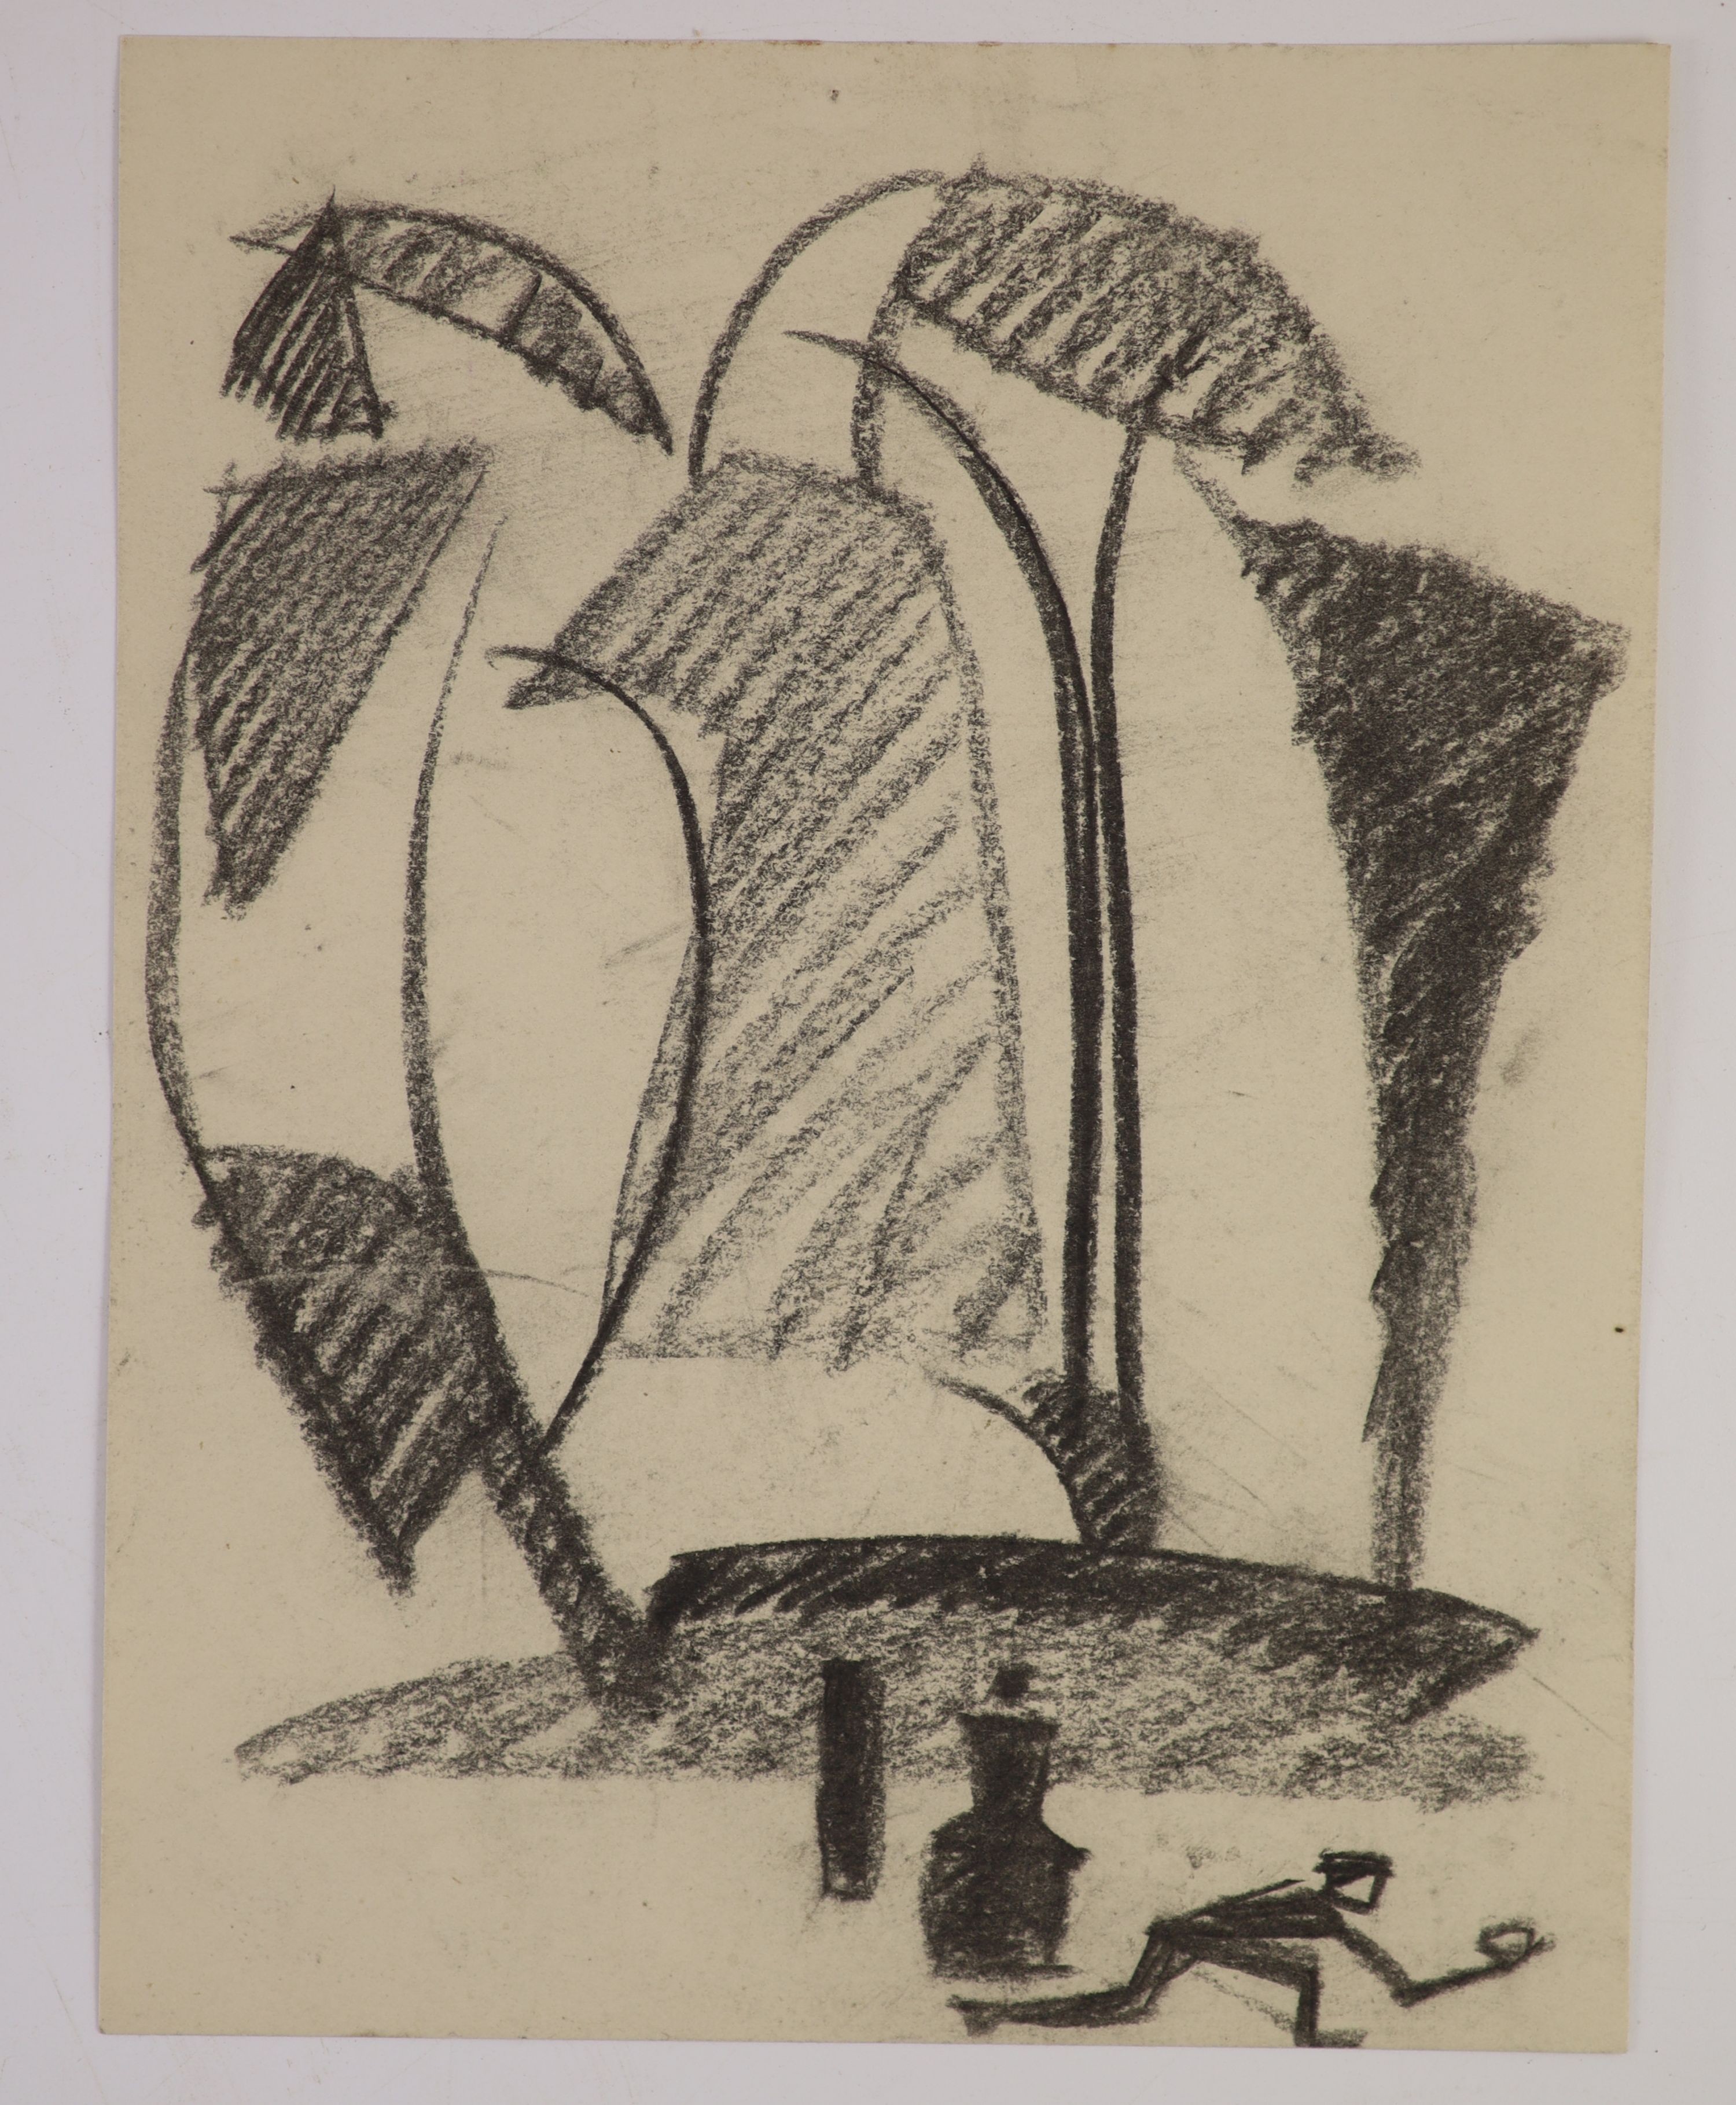 Henri Gaudier-Brzeska (1891-1915), A group of trees, a figure playing bowls in the foreground, circa 1912-13, charcoal on paper, 22.5 x 17.2 cms., unframed